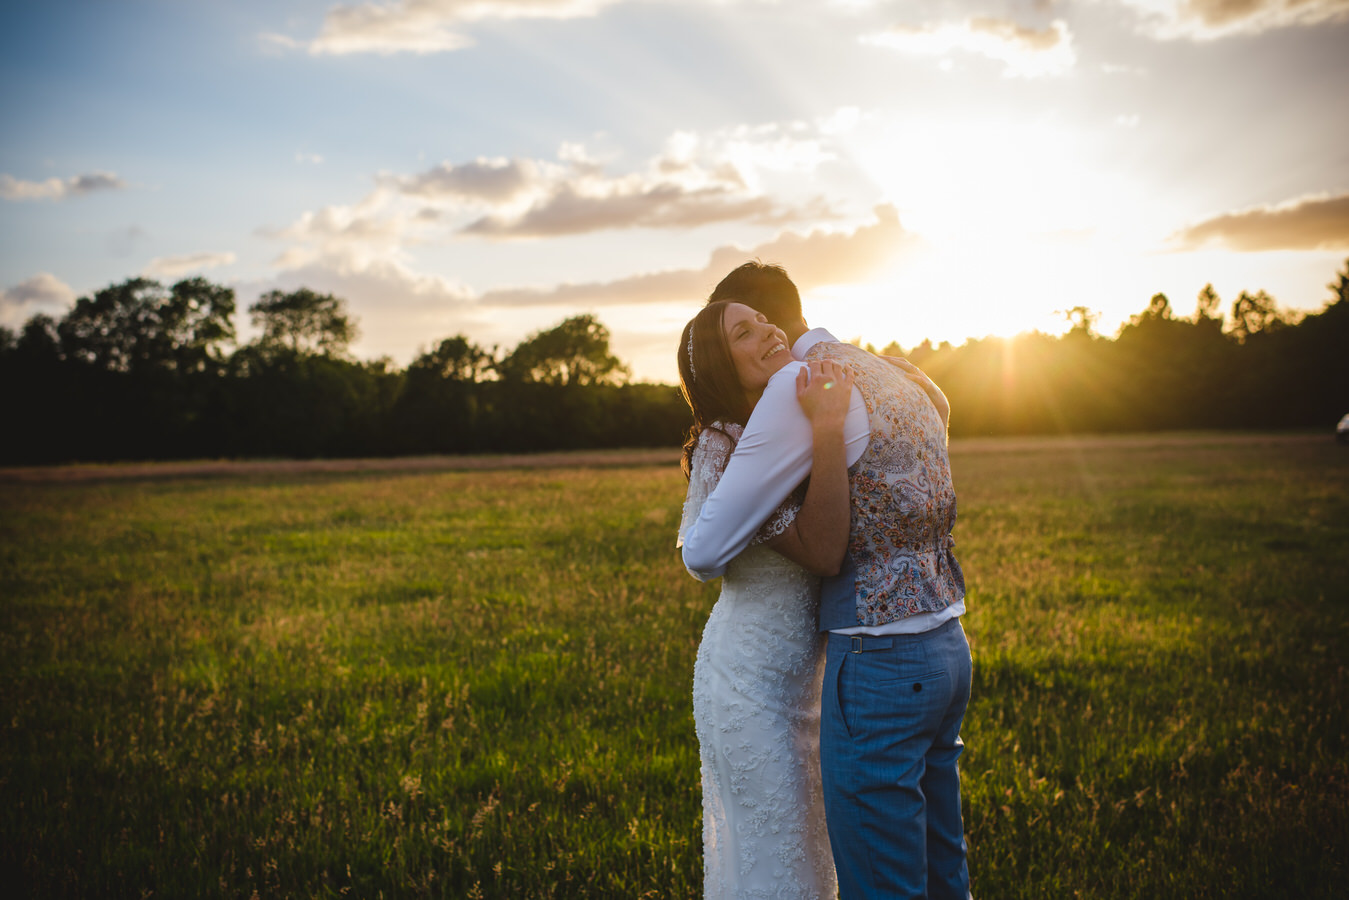 “We had the most amazing wedding day. It was so special to have the church service and then celebrate with everyone in the beautiful field setting. How it all came together was incredible and gave the chilled but special vibe we had been after!”